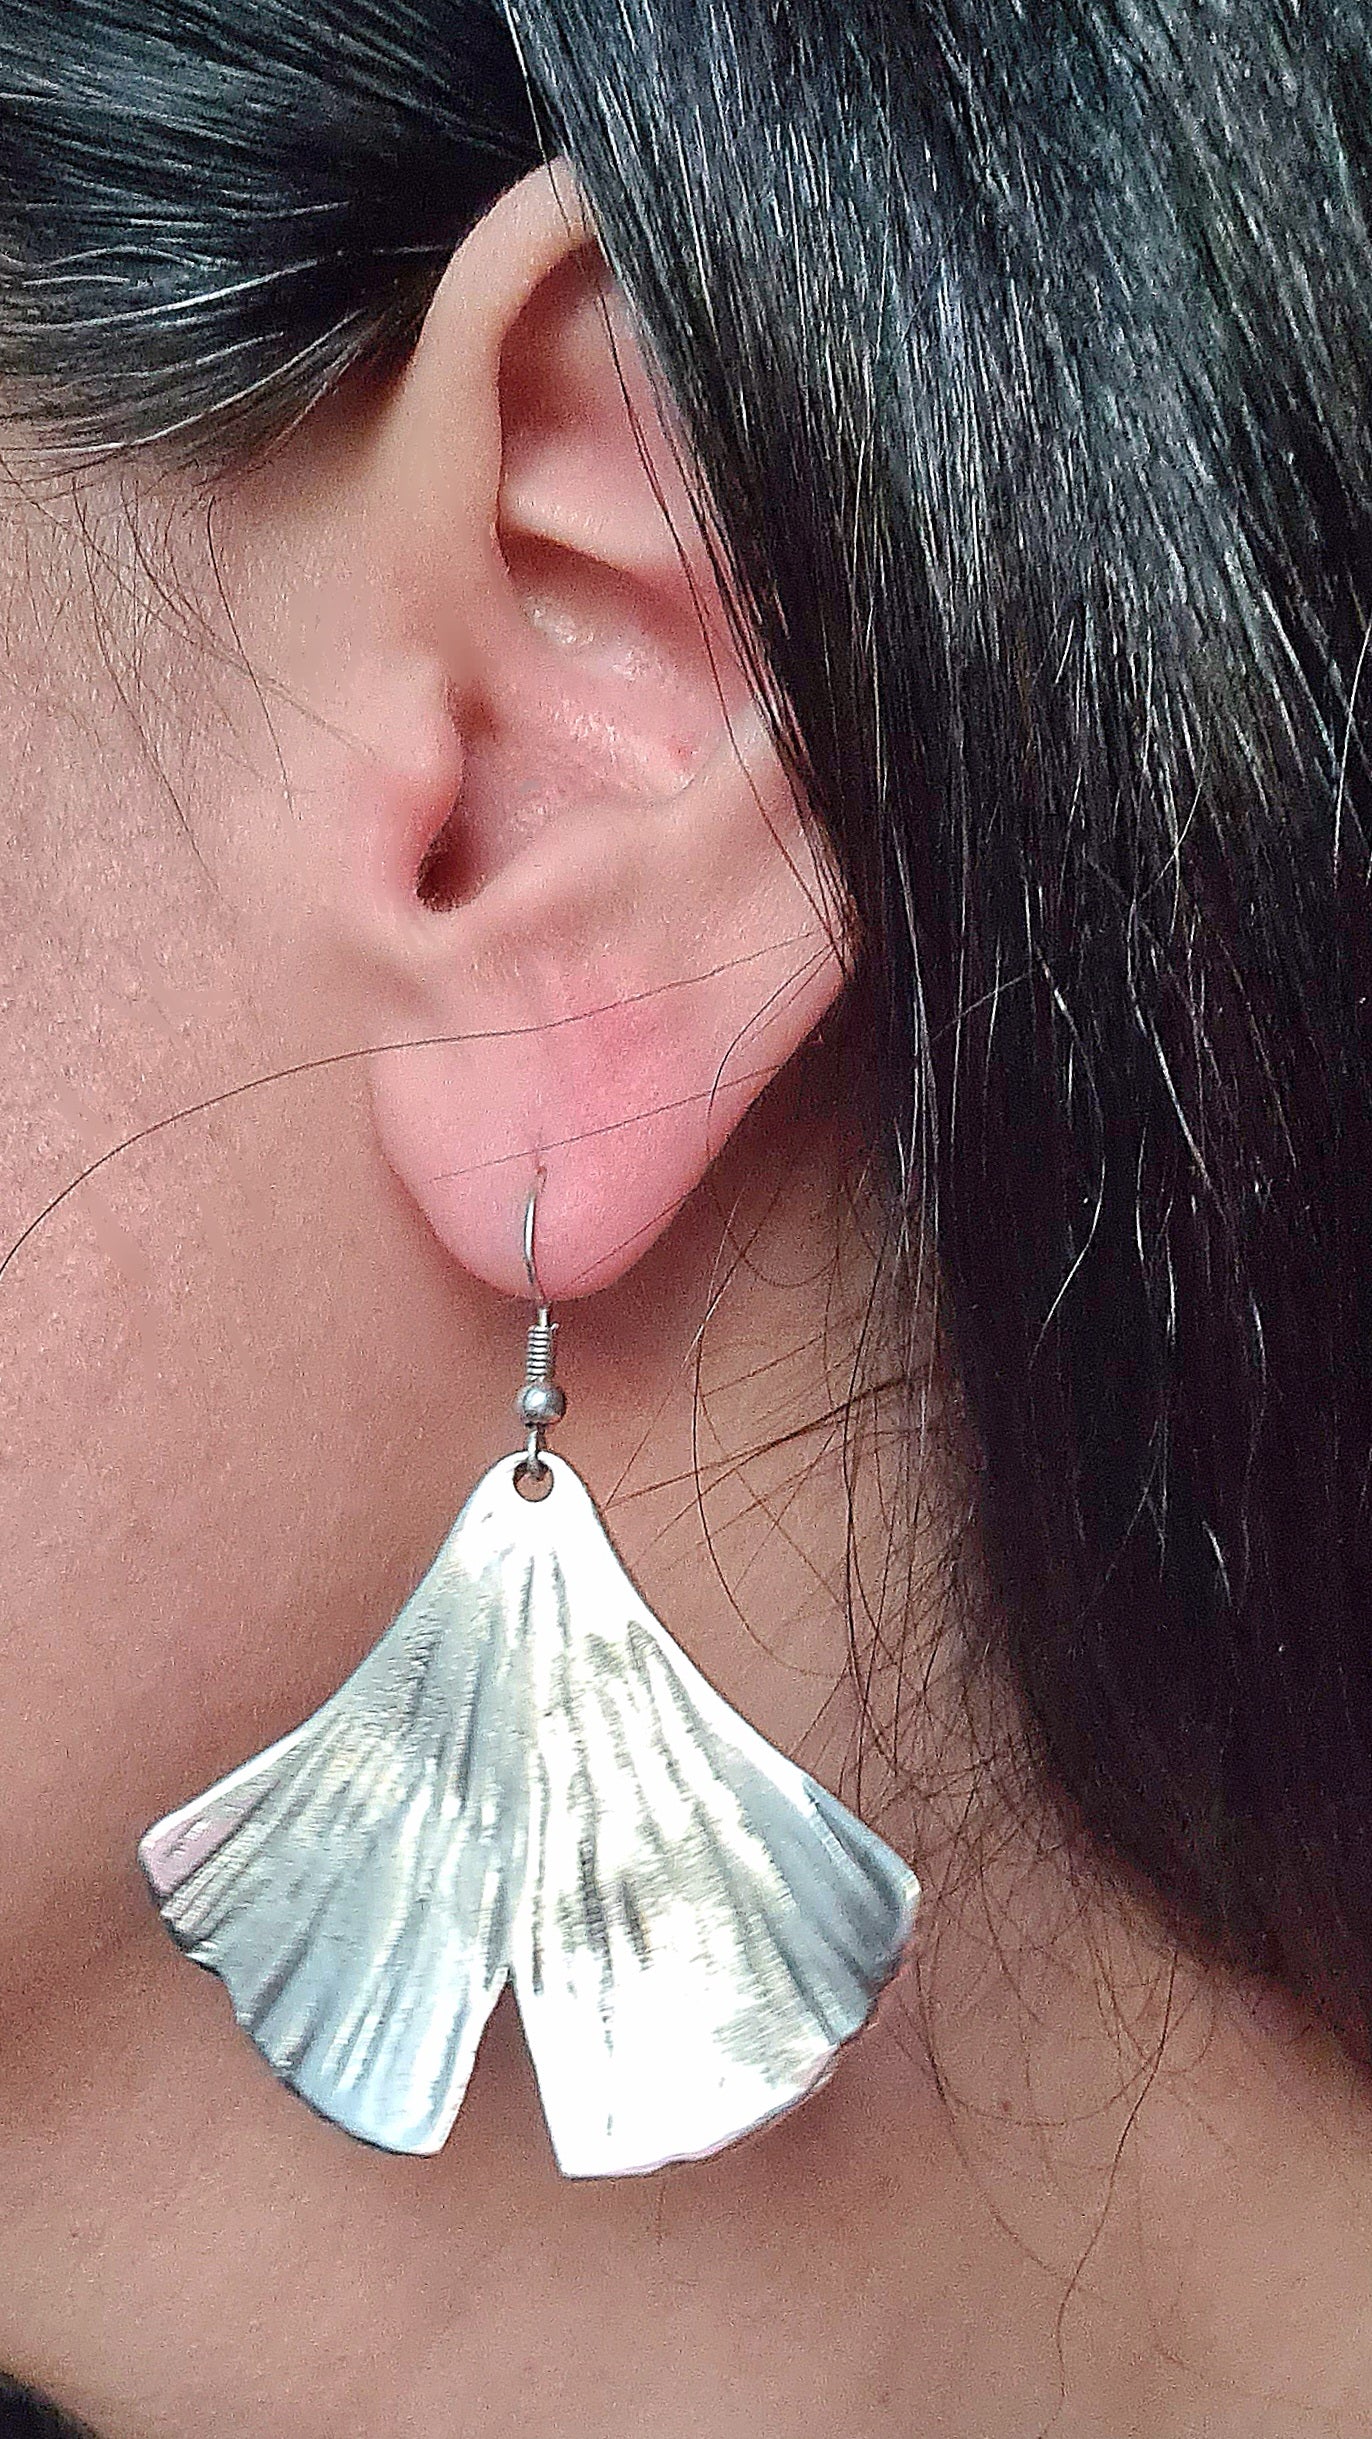 a woman wearing a pair of silver earrings in the shape of a ginkgo leaf . The earrings are small and delicate, and they have a shiny finish. The ginkgo leaf is fan-shaped and has a textured appearance.